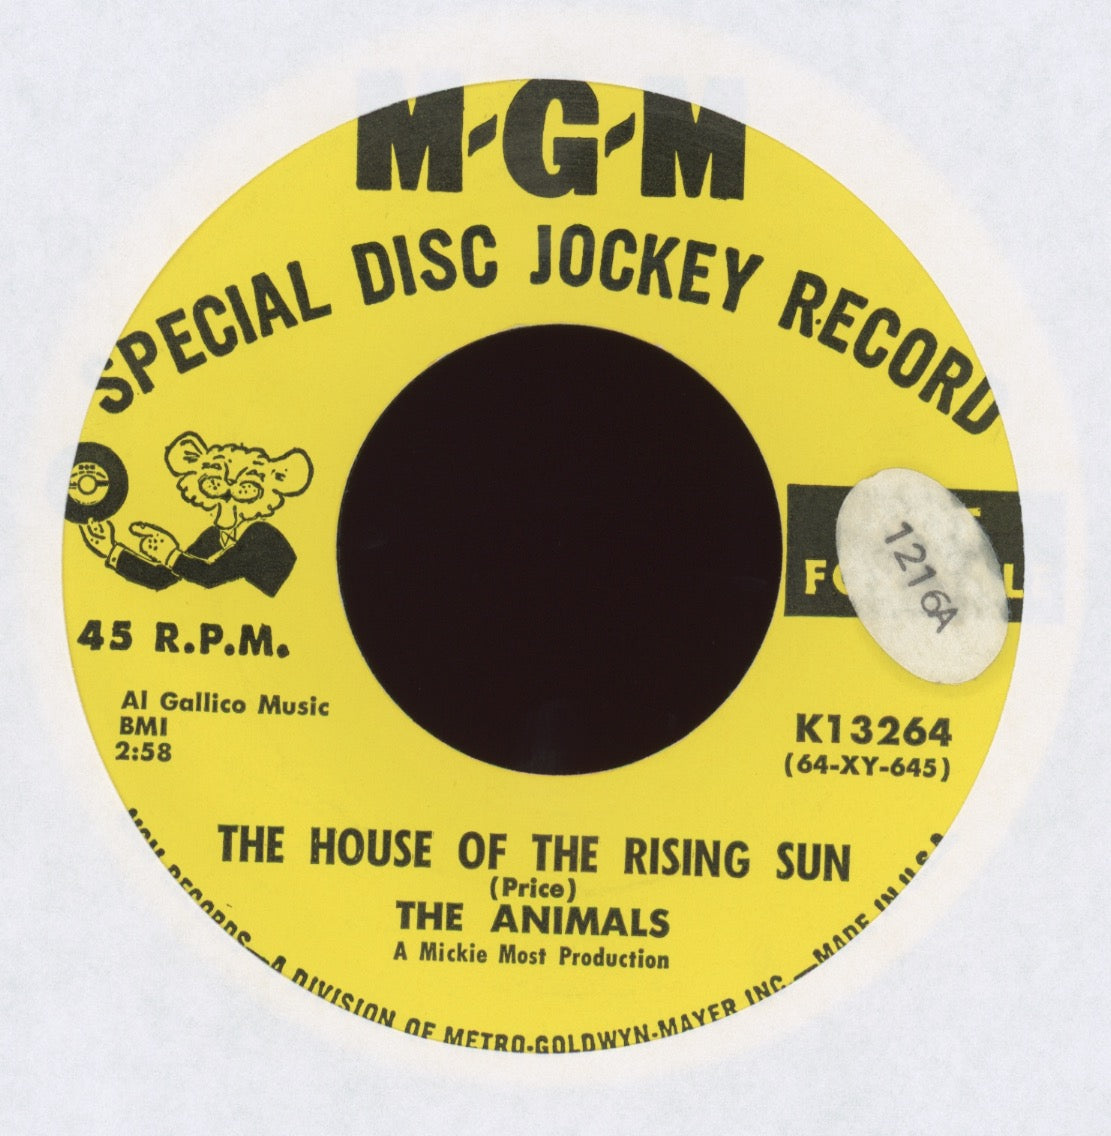 The Animals - The House Of The Rising Sun on MGM